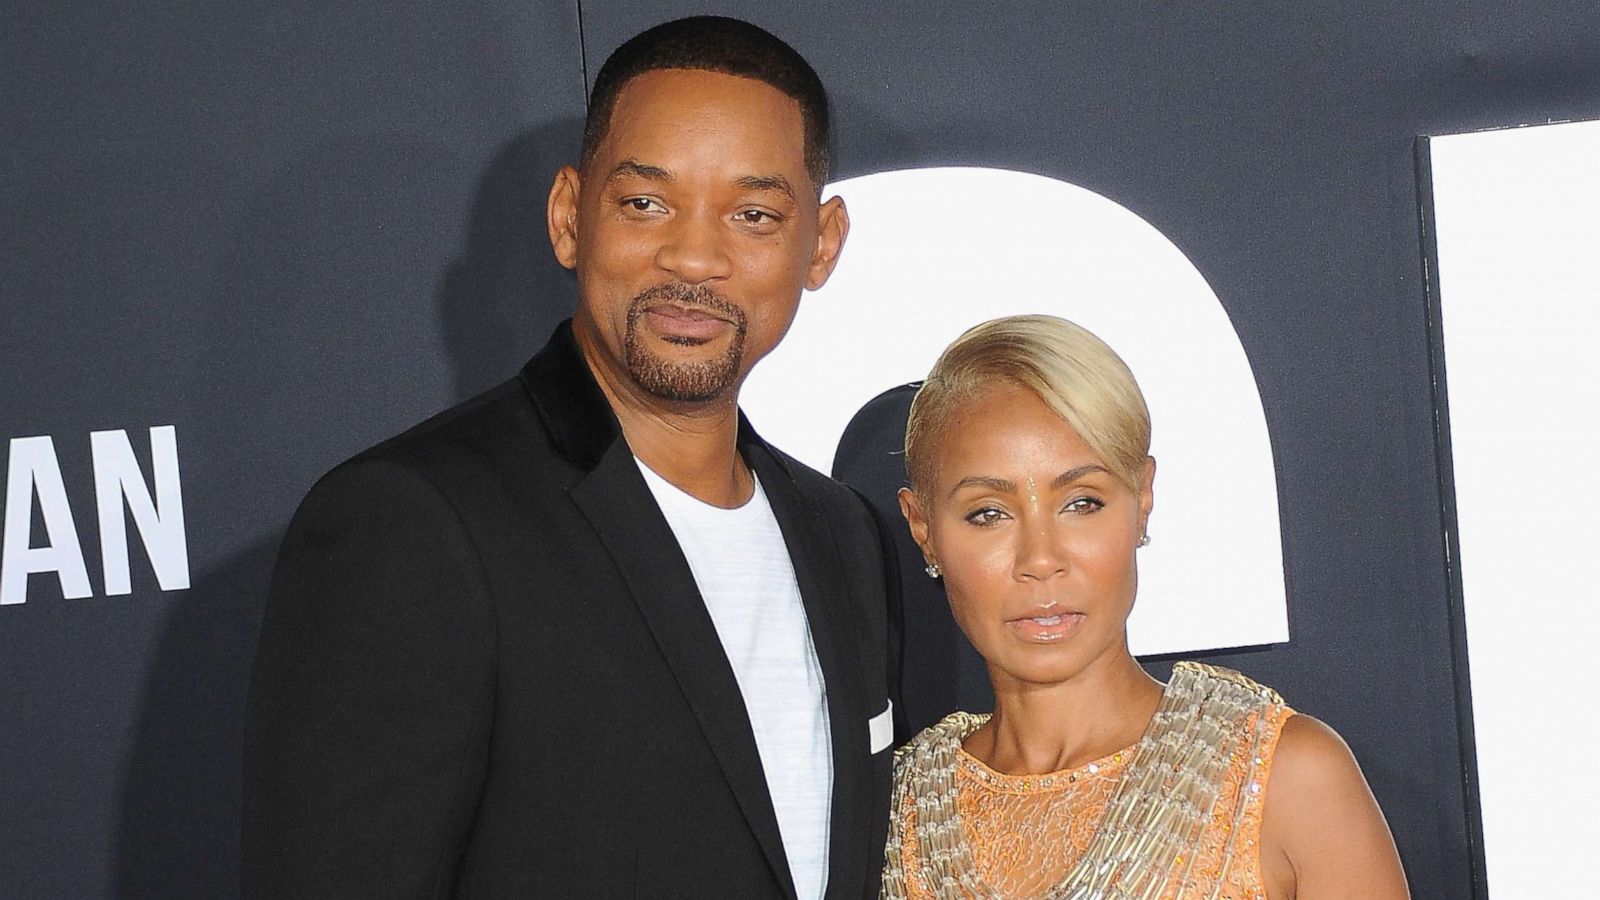 PHOTO: Will Smith and Jada Pinkett Smith at TCL Chinese Theatre, Oct. 6, 2019, in Hollywood, Calif.